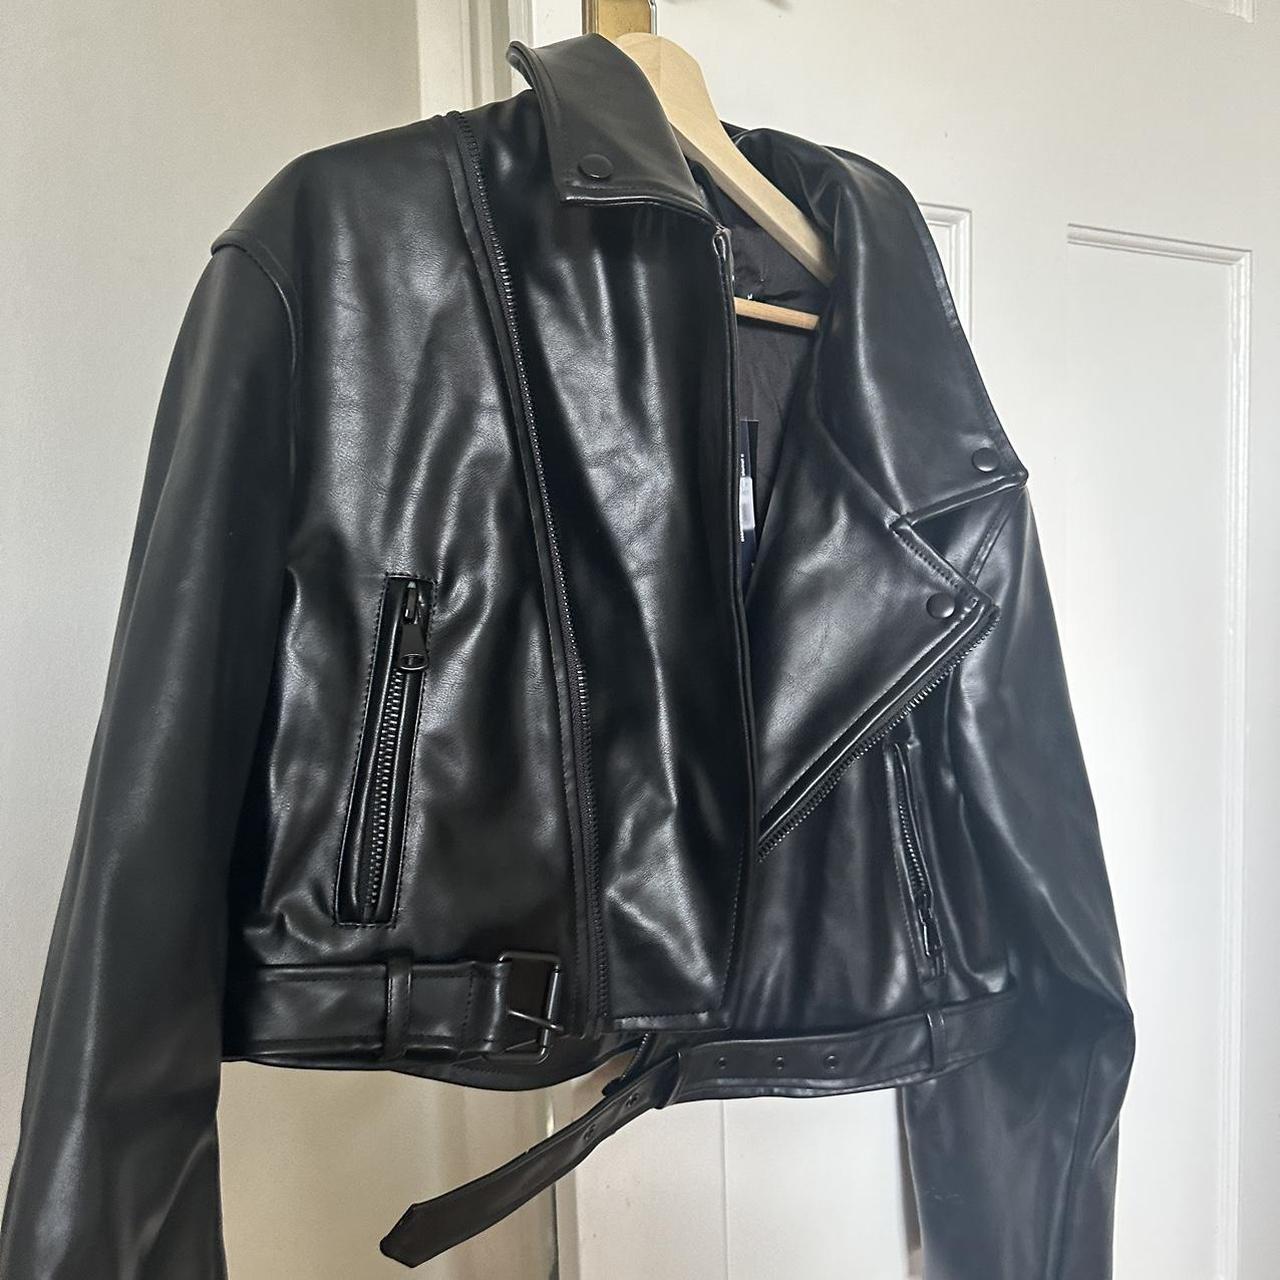 Lioness leather jacket w tags!! Quality is unreal.... - Depop